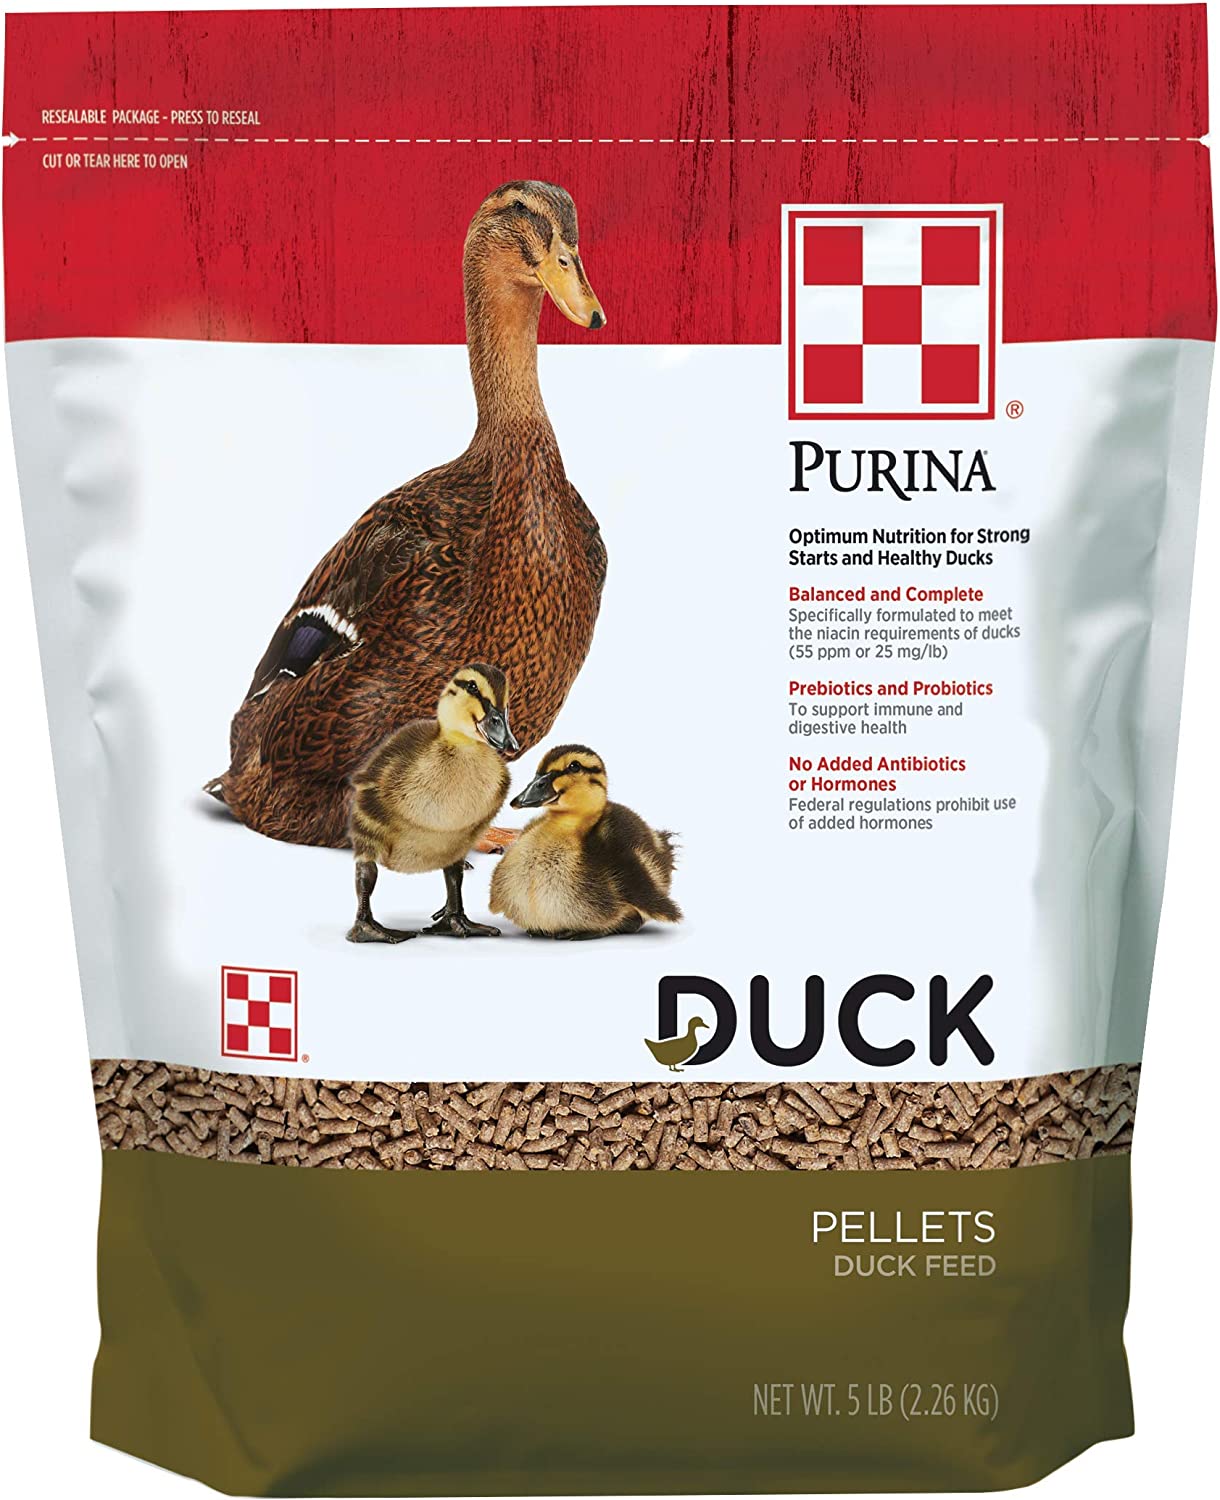 Purina Duck Feed for Pet and wild ducks | 5 Pound (5 lb.) Bag